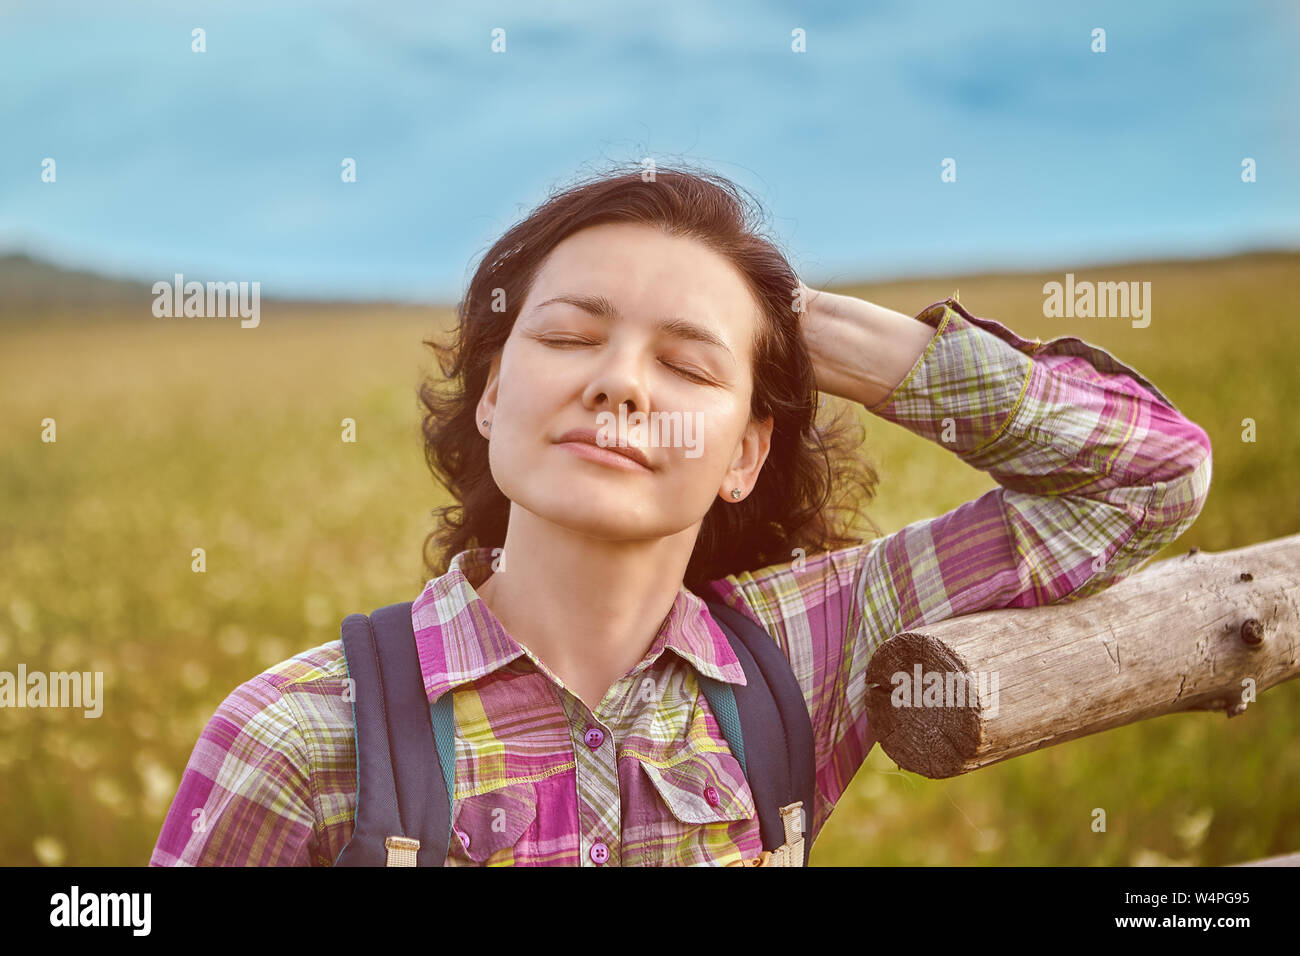 One woman turned to the sun with her eyes closed. Stock Photo